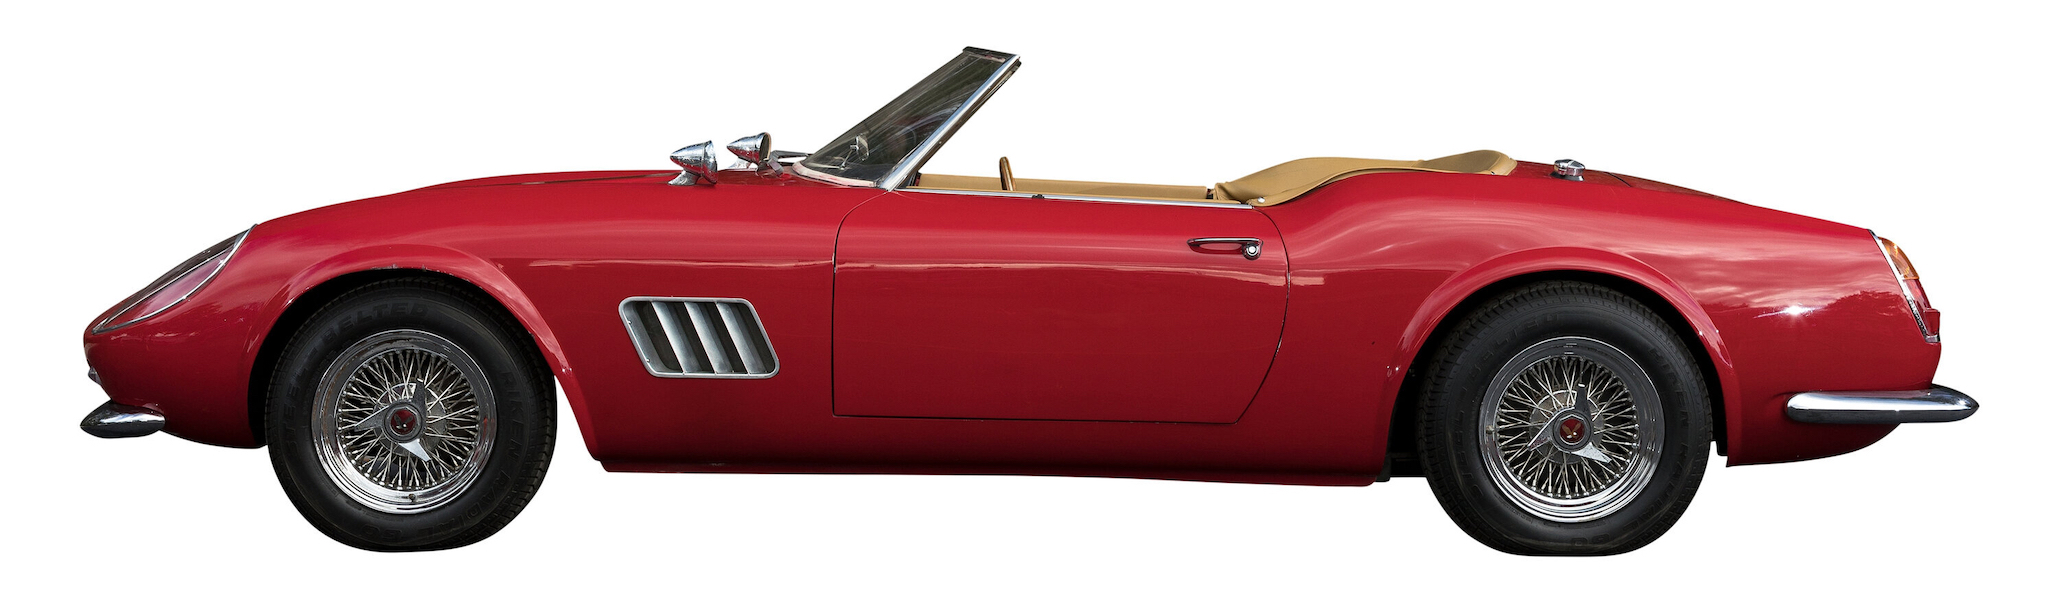 Prop Ferrari 250 GT California replica created for ‘Ferris Bueller’s Day Off,’ $337,500. Image courtesy of Heritage Auctions